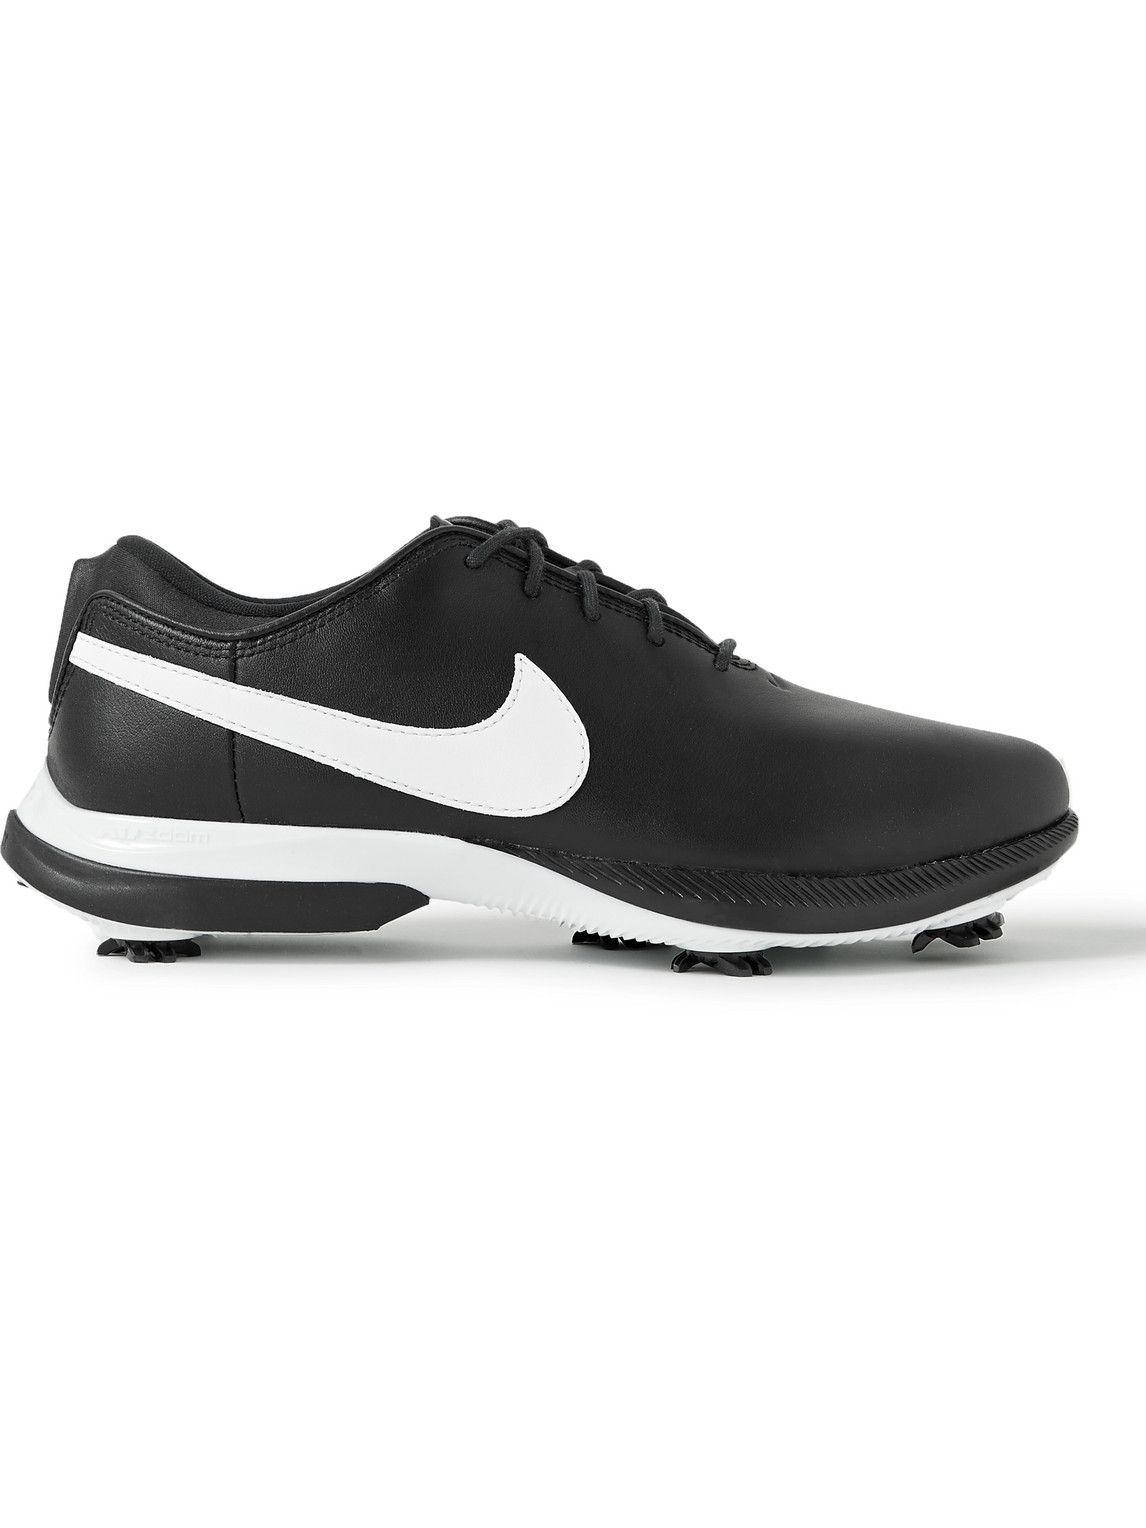 Nike Golf - Air Zoom Victory Tour 2 Leather Golf Shoes - Black Nike Golf